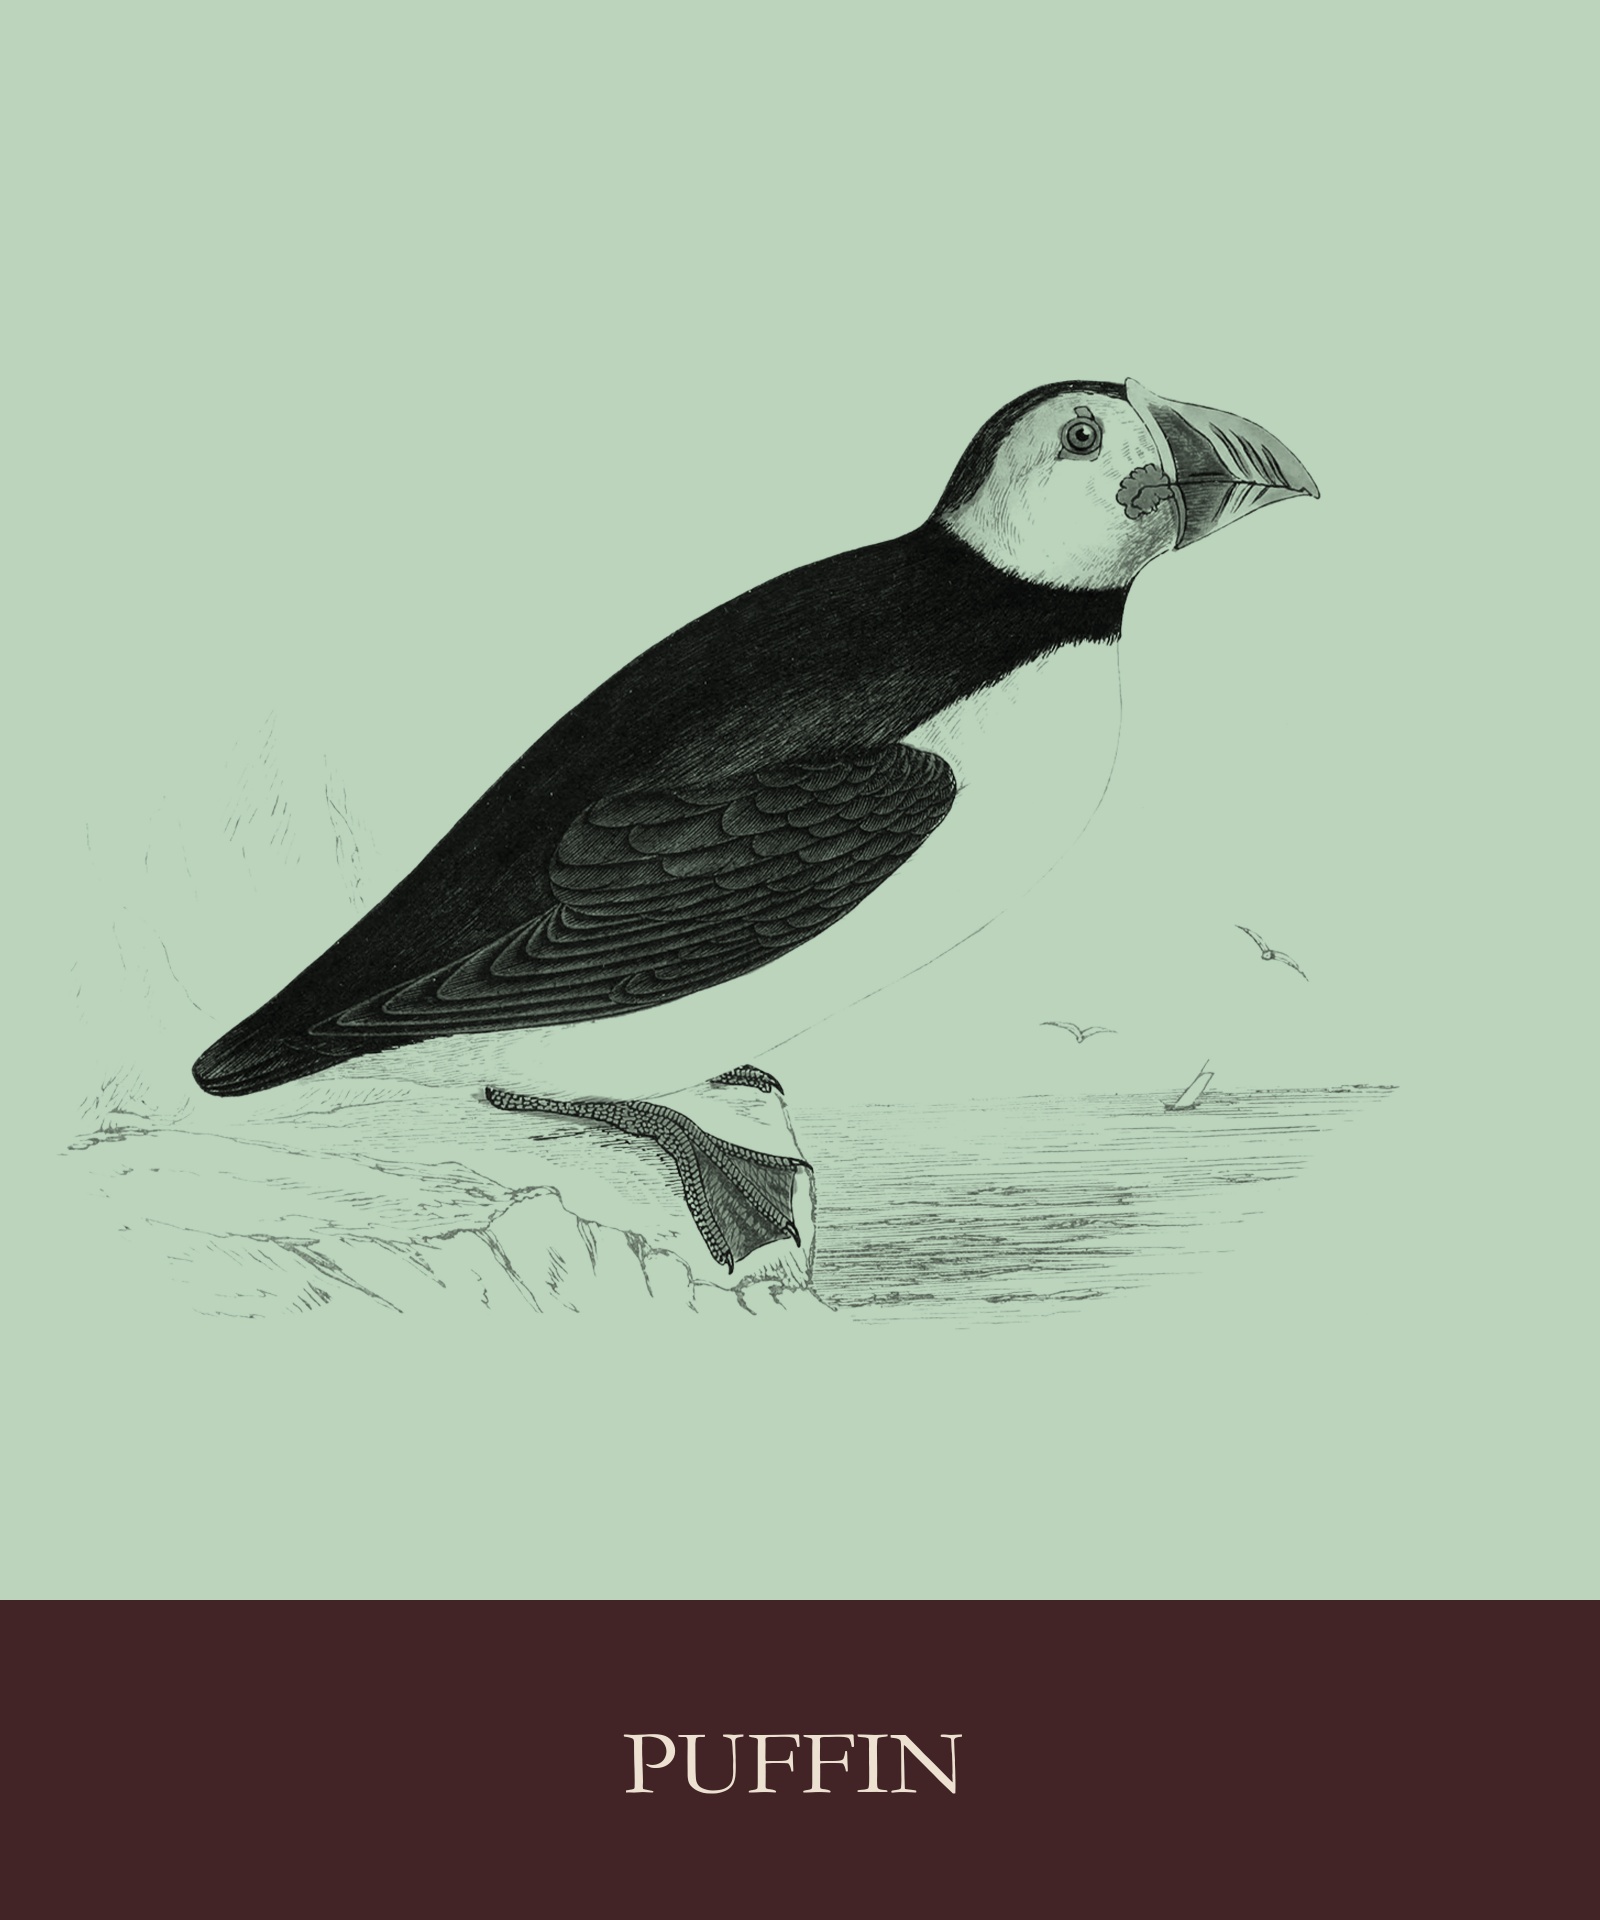 Vintage illustration of a puffin